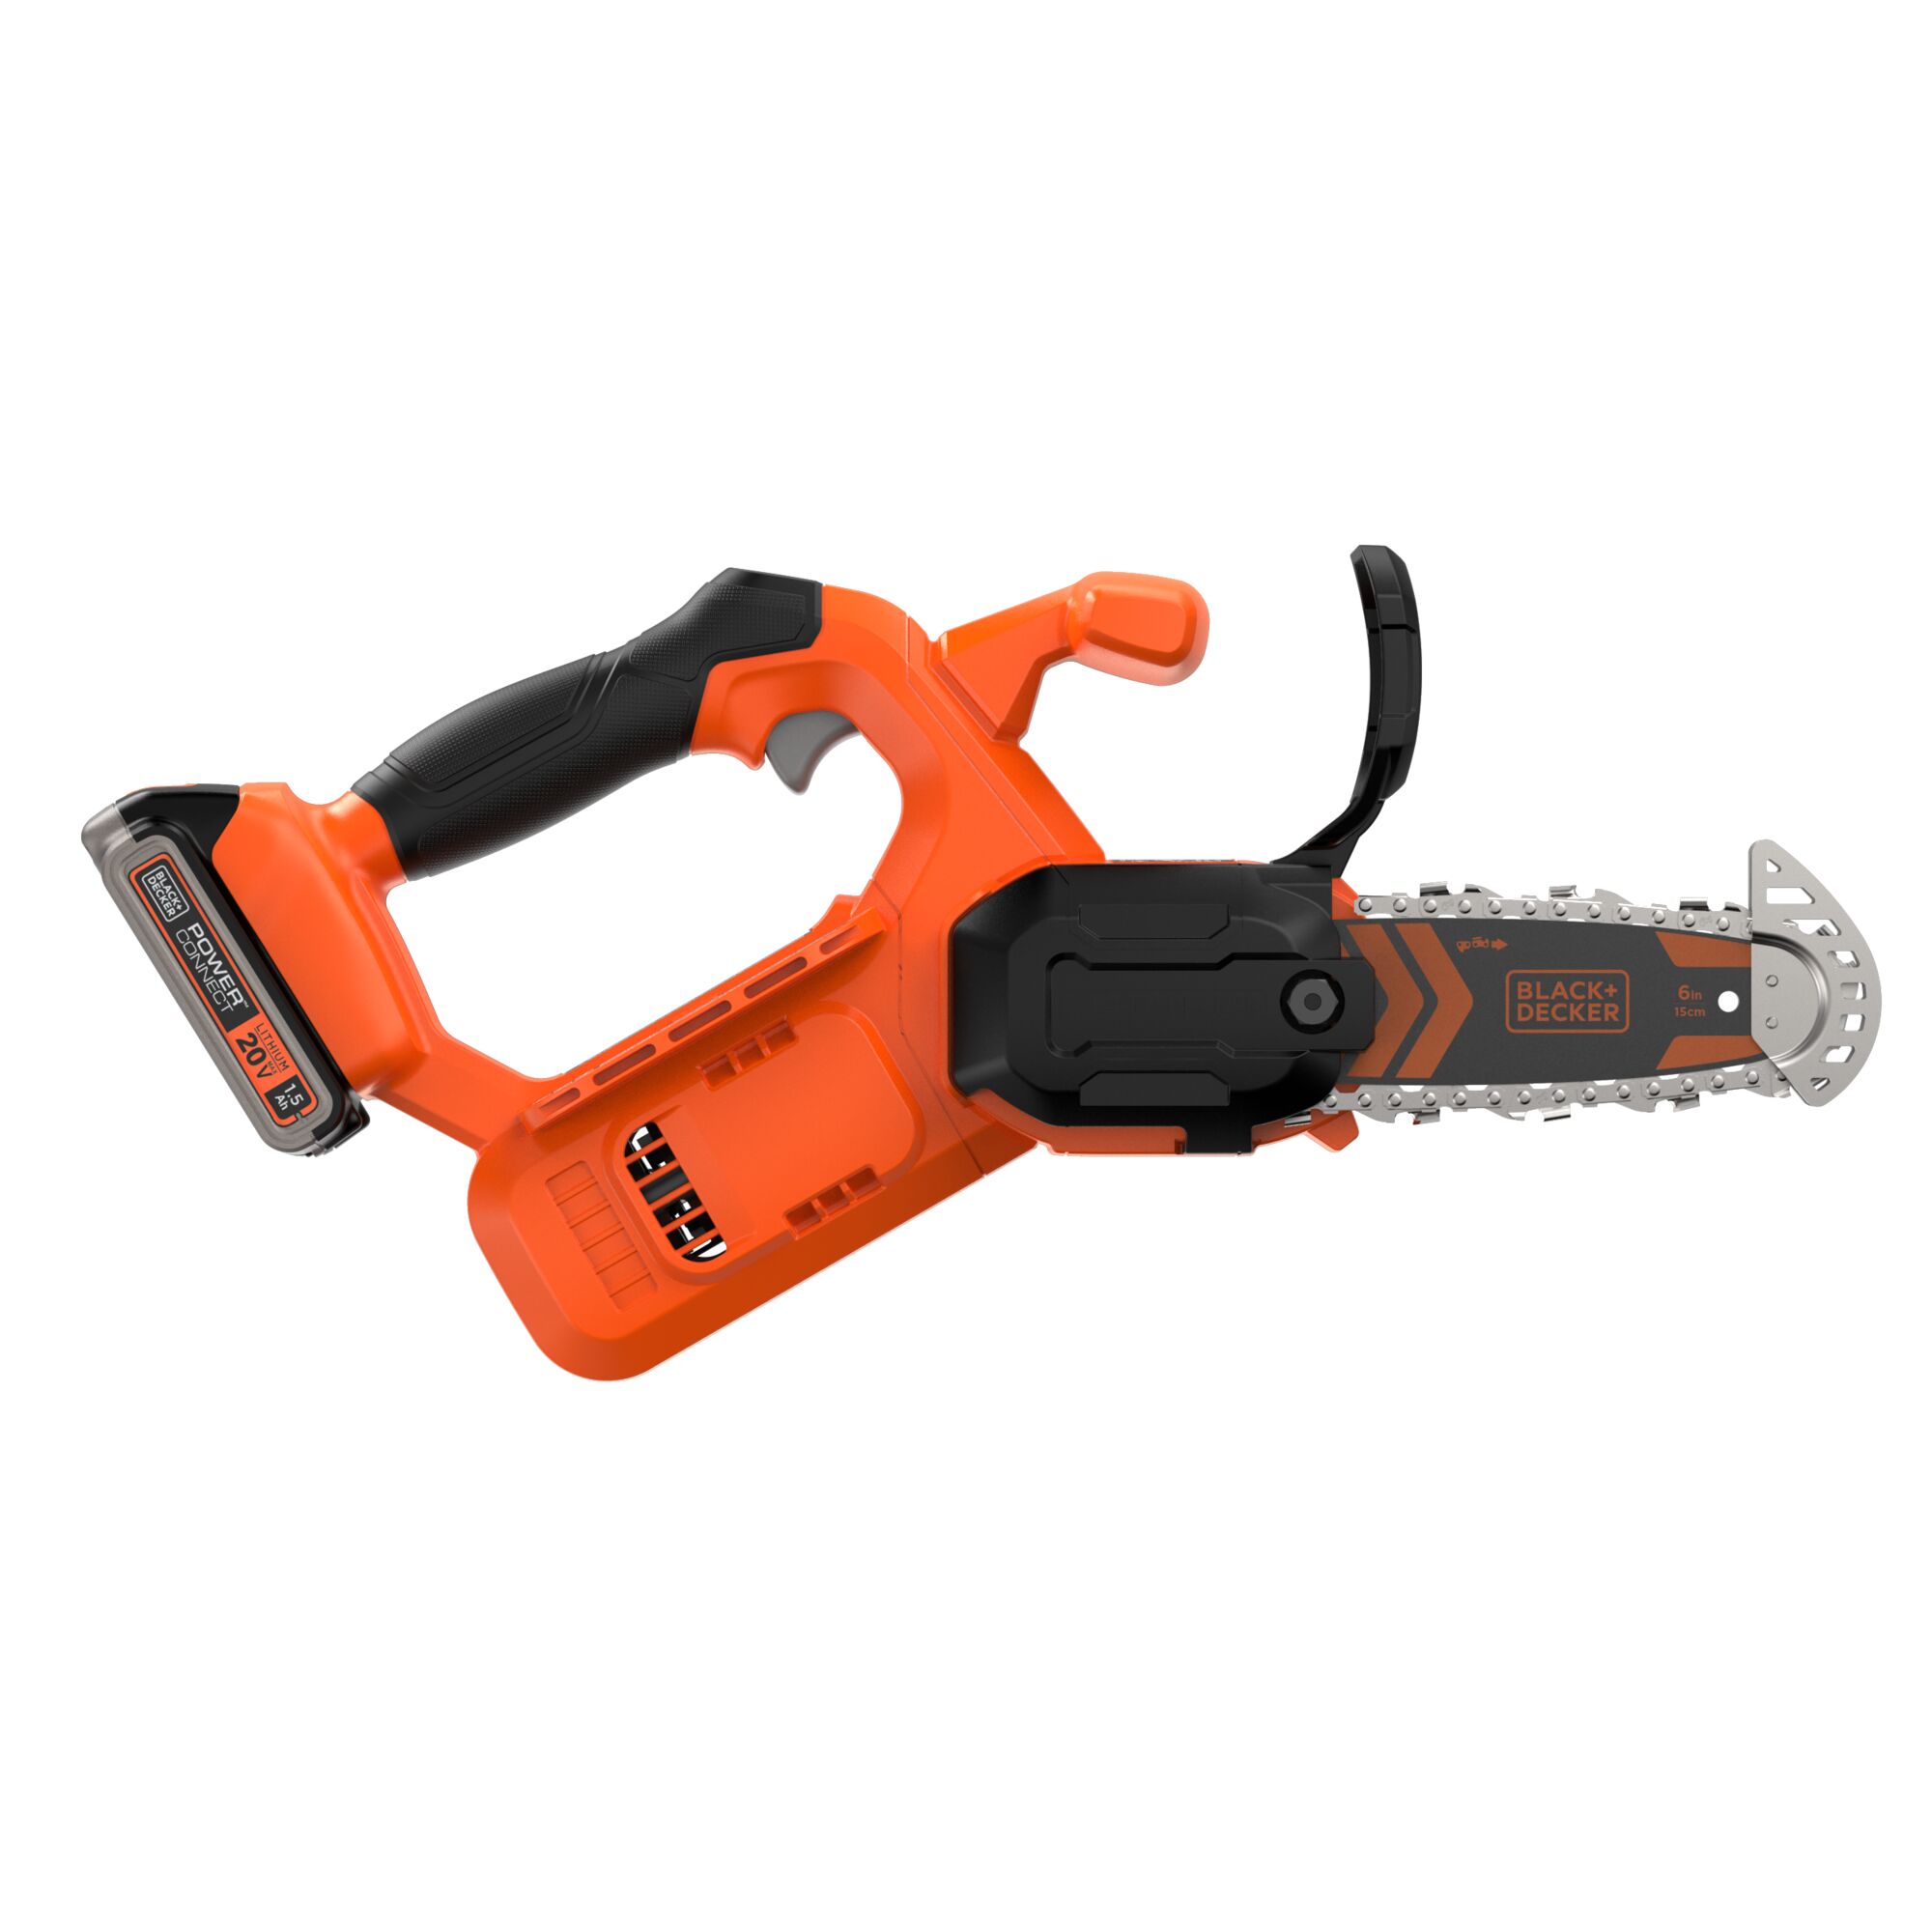 Profile of 20V Max Pruning chainsaw